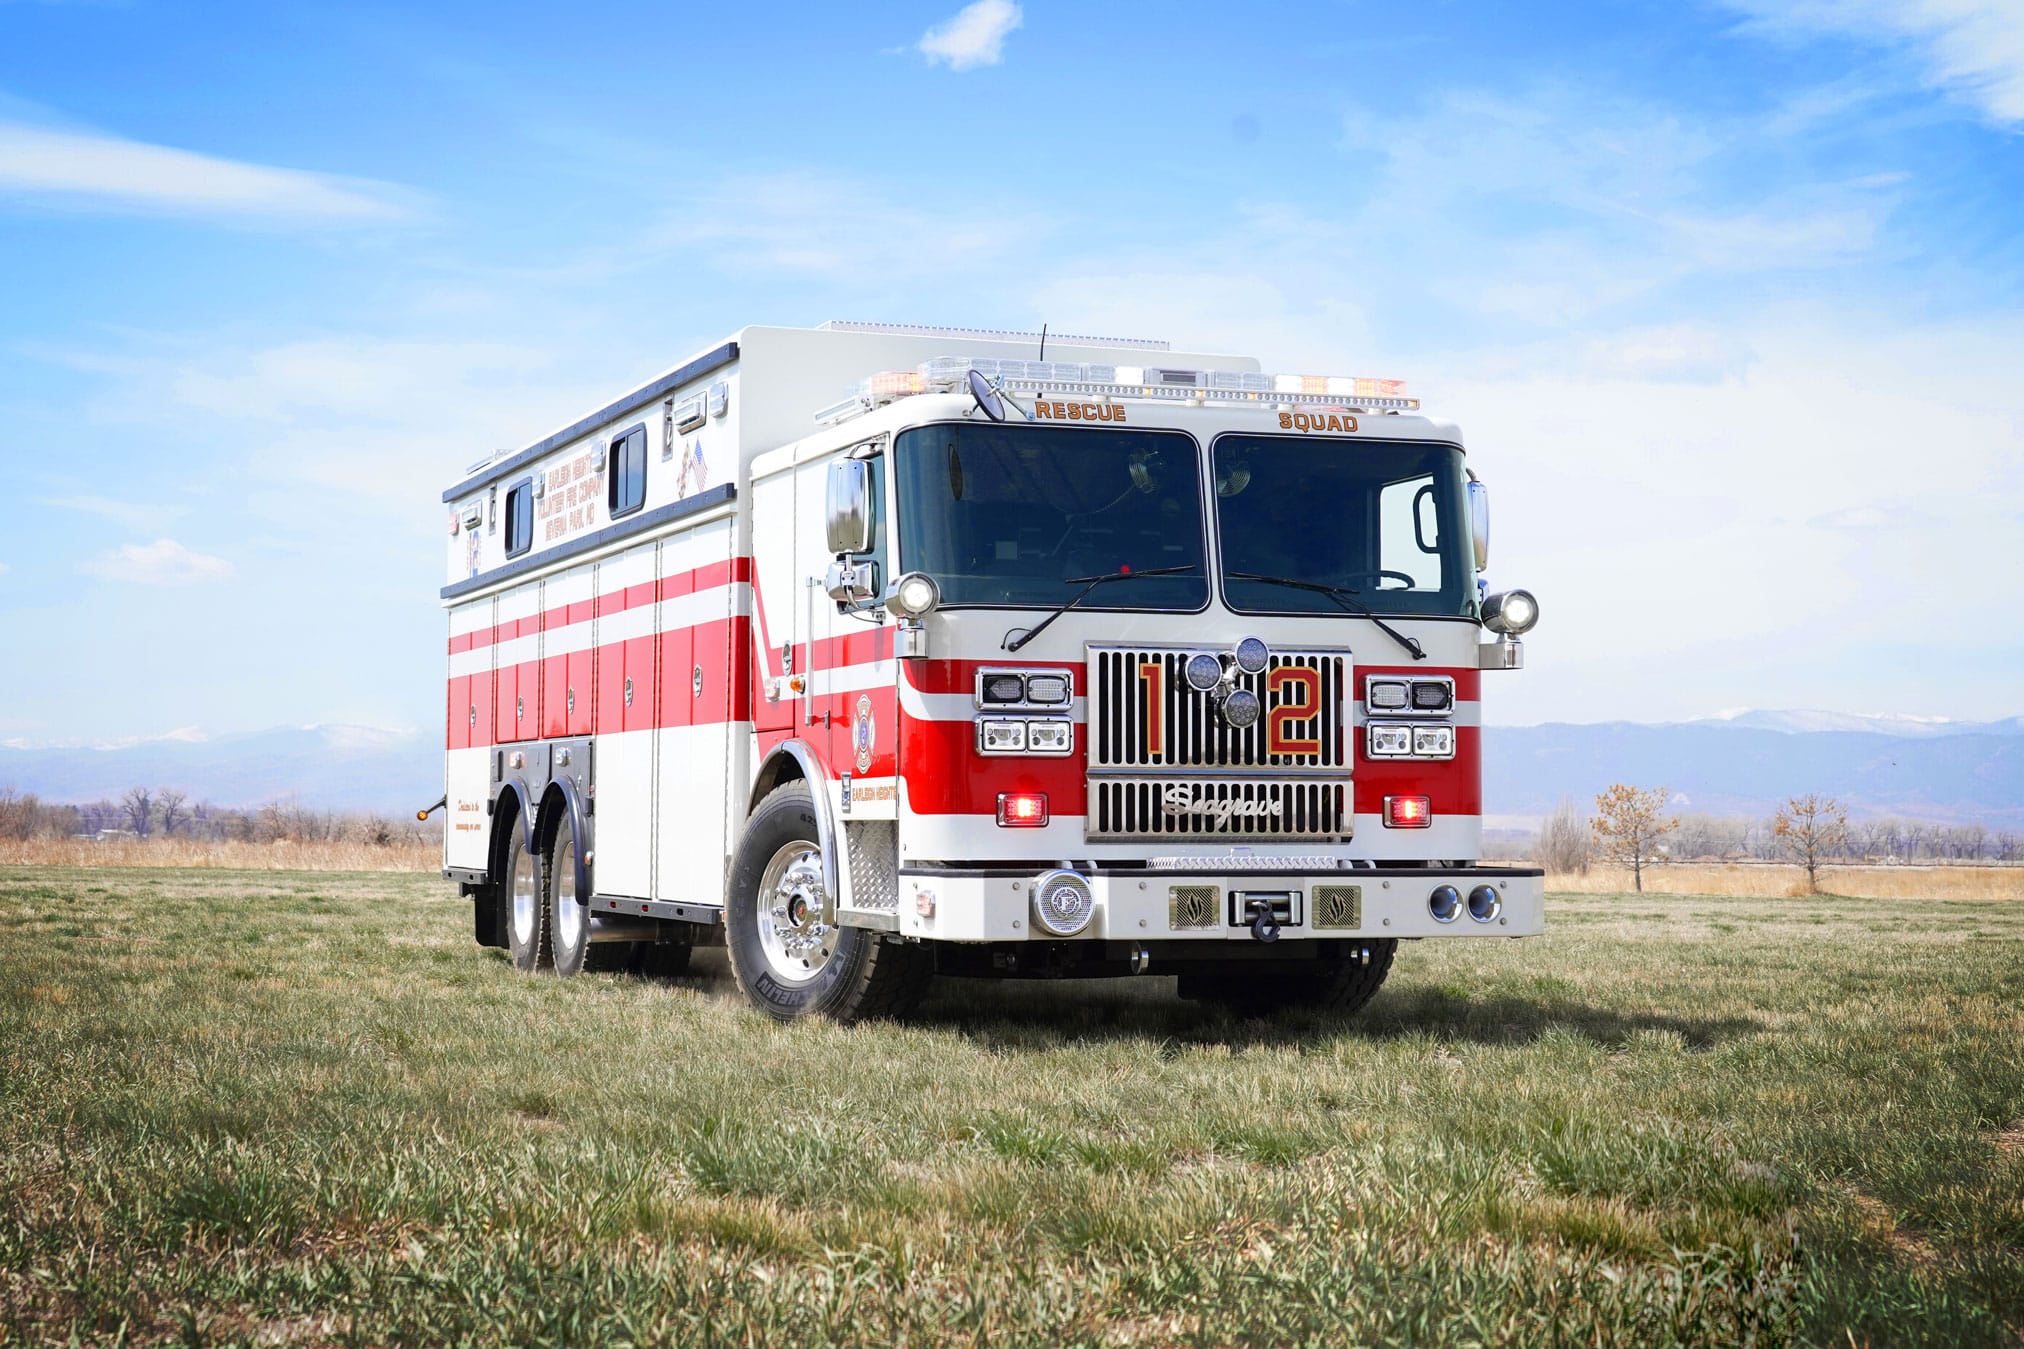 Featured image for “Earleigh Heights (MD) Walk-In Heavy Rescue #1180”